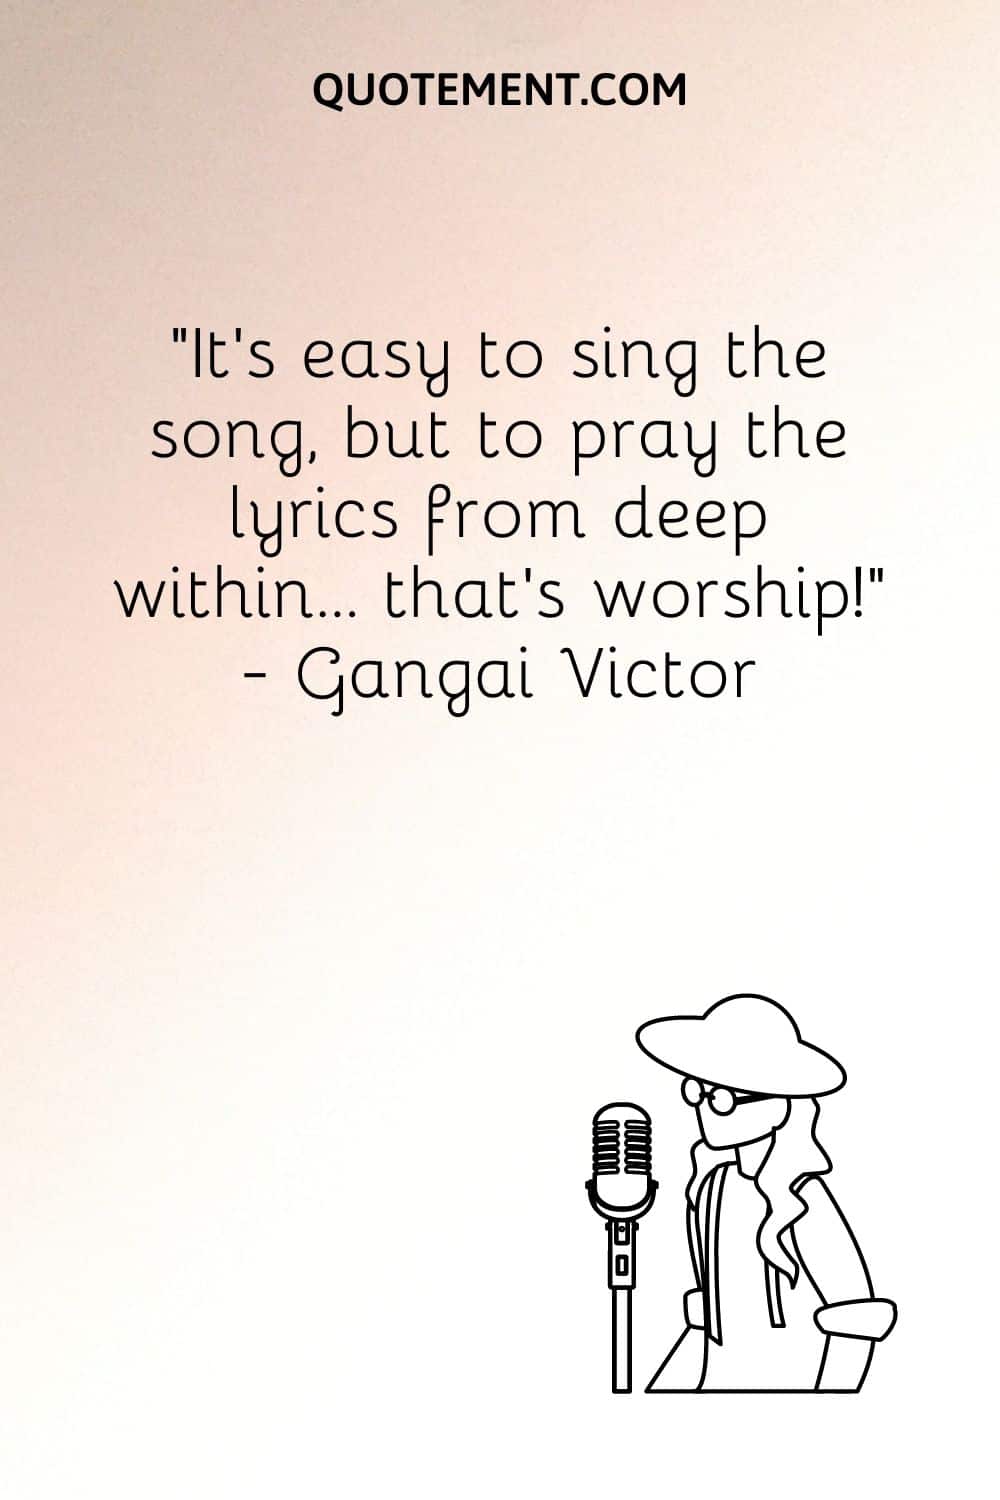 “It’s easy to sing the song, but to pray the lyrics from deep within… that’s worship!” ― Gangai Victor